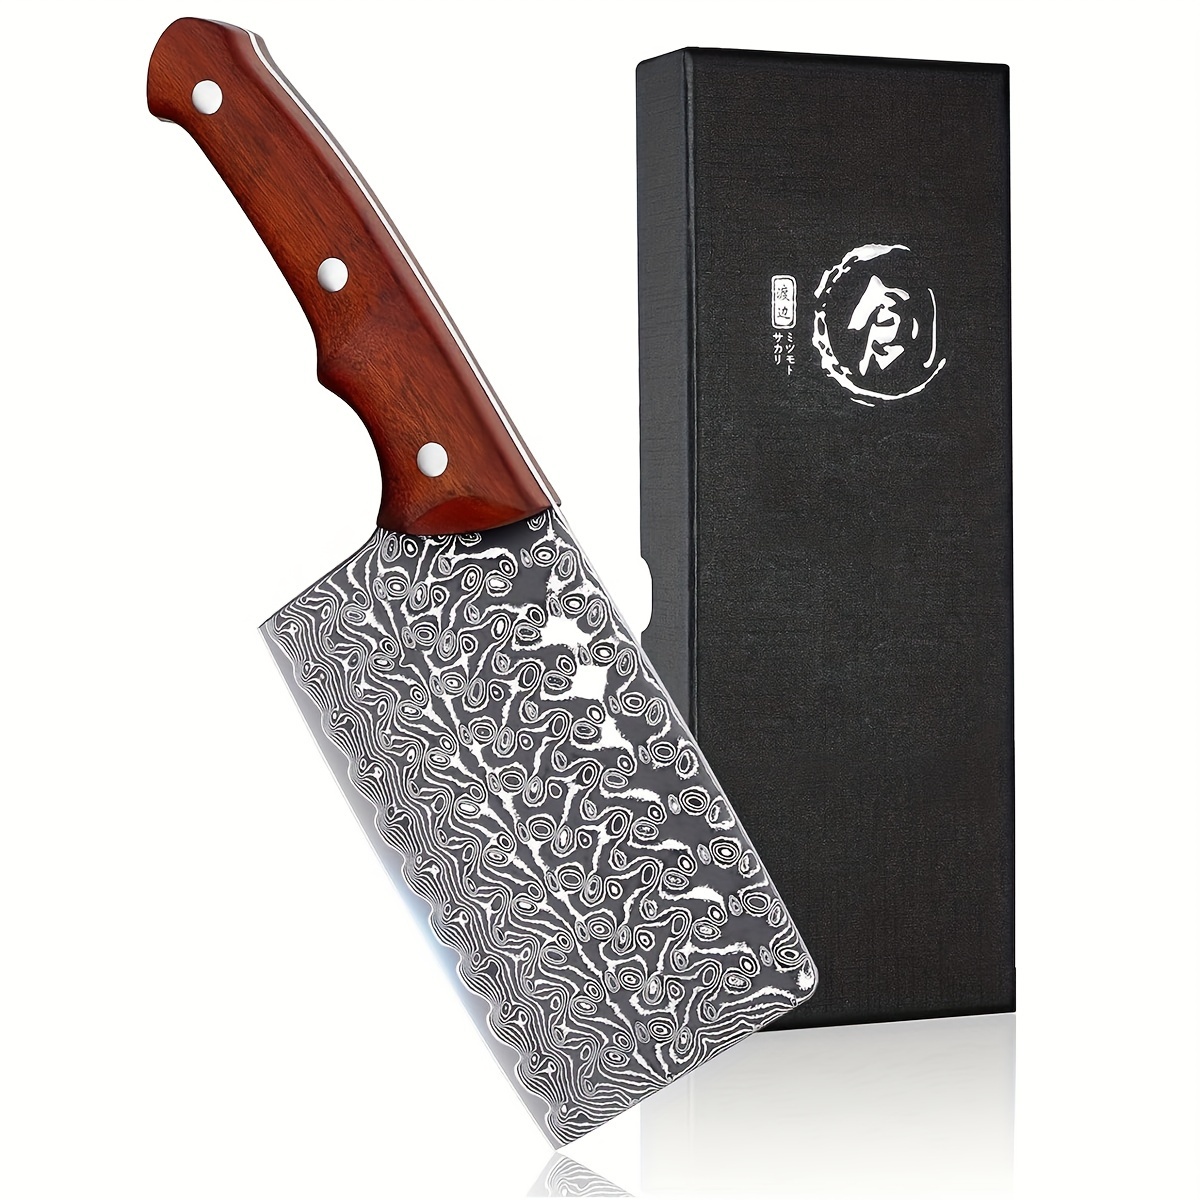 

Chef Knife, Professional Kitchen Knife 5 Inch Damascus Cleaver Knife-high Carbon Stainless Steel Vegetable Meat Cleaver With Ergonomic Handle - Perfect Kitchen Tool - Ideal Gift